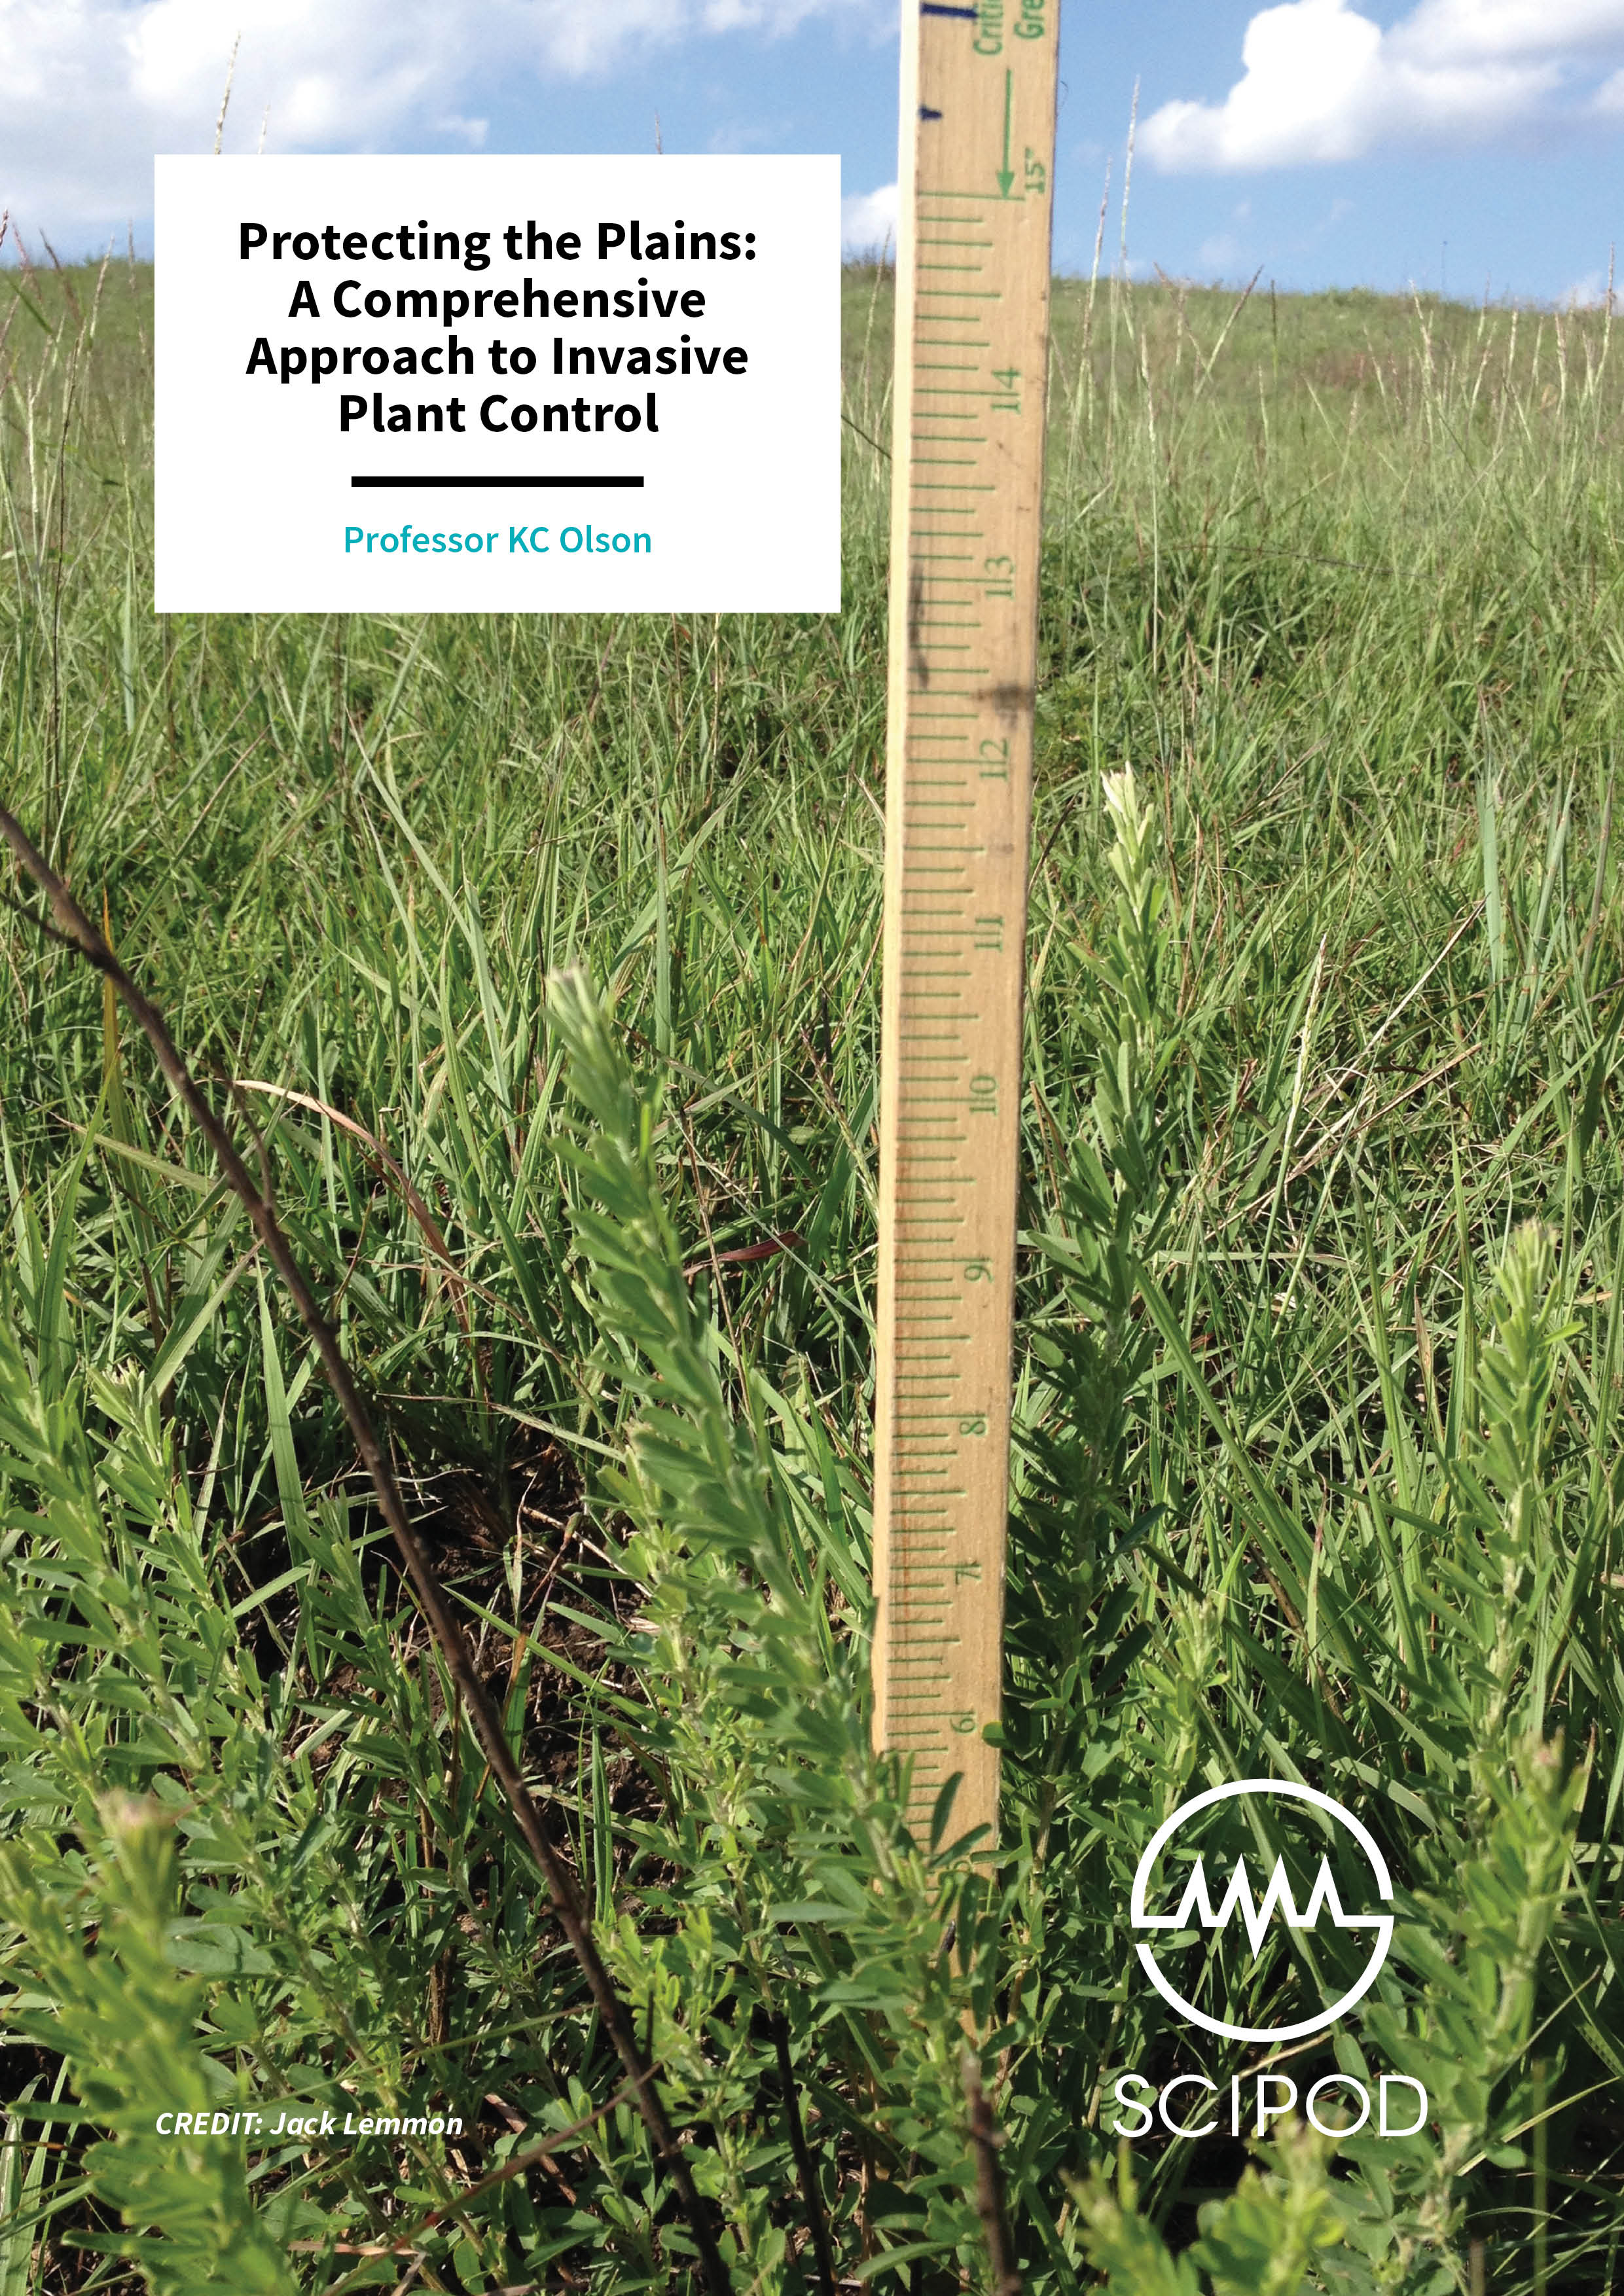 Protecting the Plains, A Comprehensive Approach to Invasive Plant Control – Professor KC Olson, Kansas State University